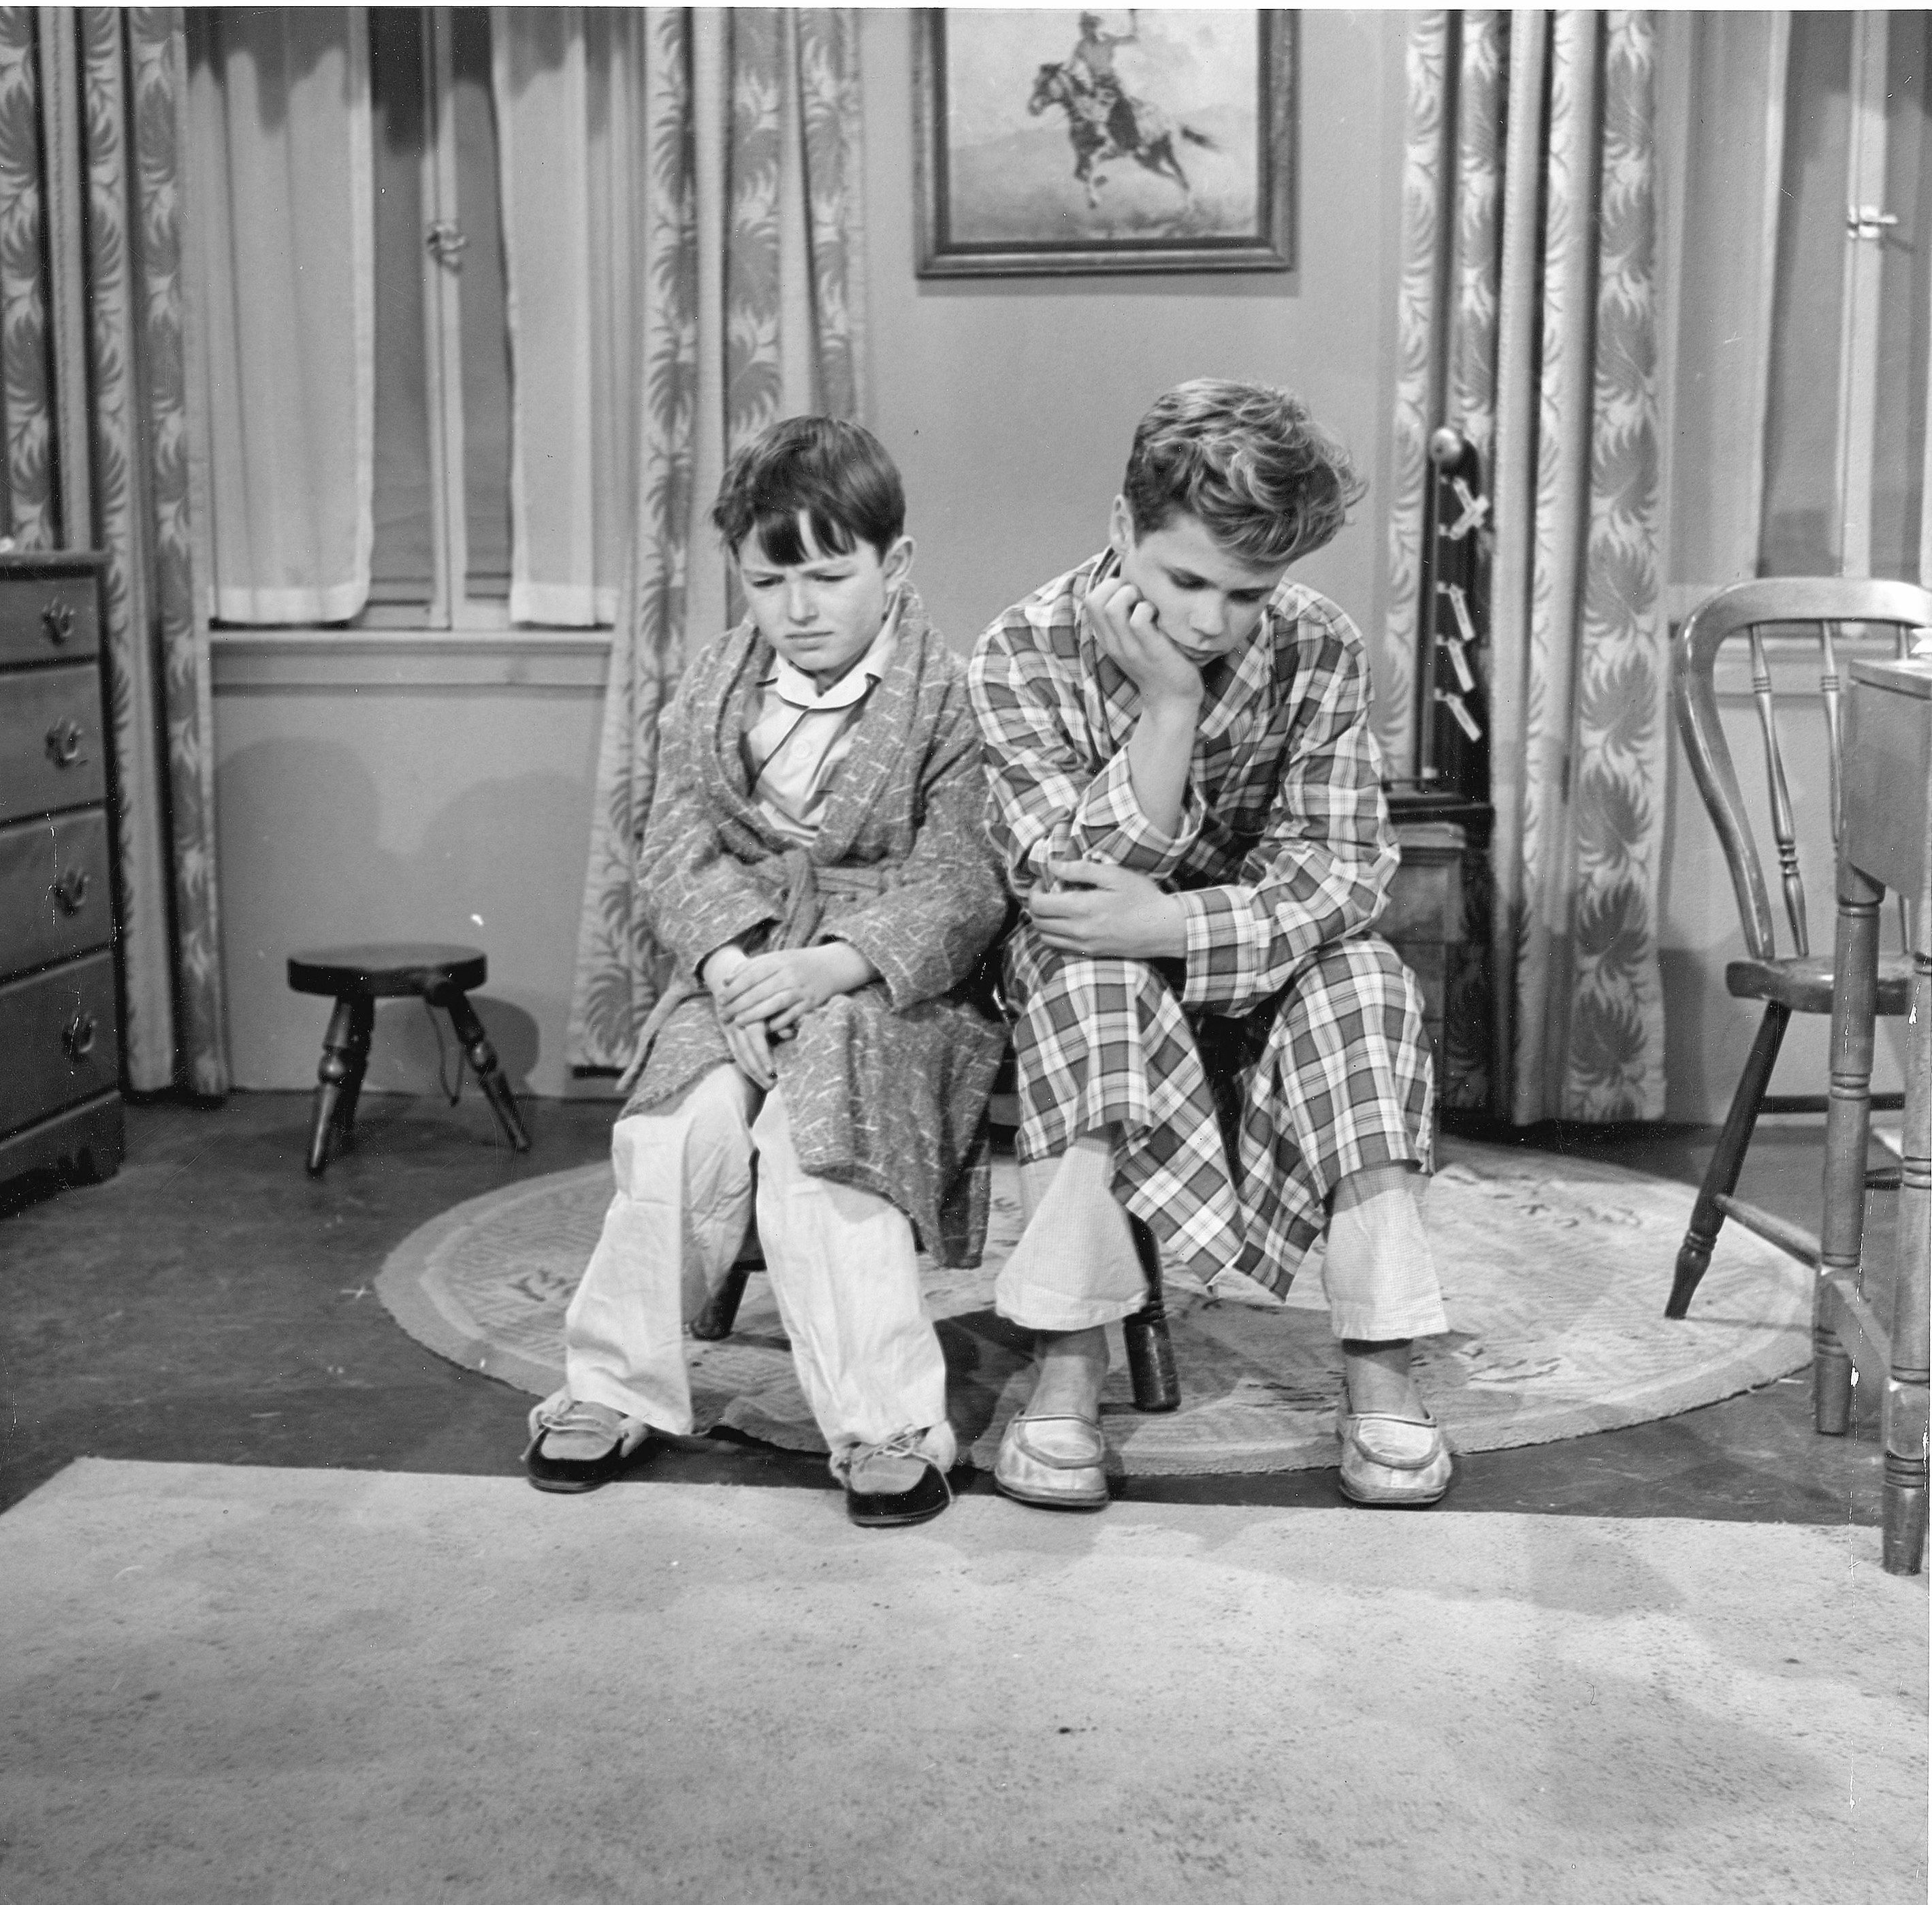 (L to R): Jerry Mathers as Beaver Cleaver and Tony Dow as Wally Cleaver are dressed in robes and sitting forlornly in a scene from 'Leave It to Beaver'